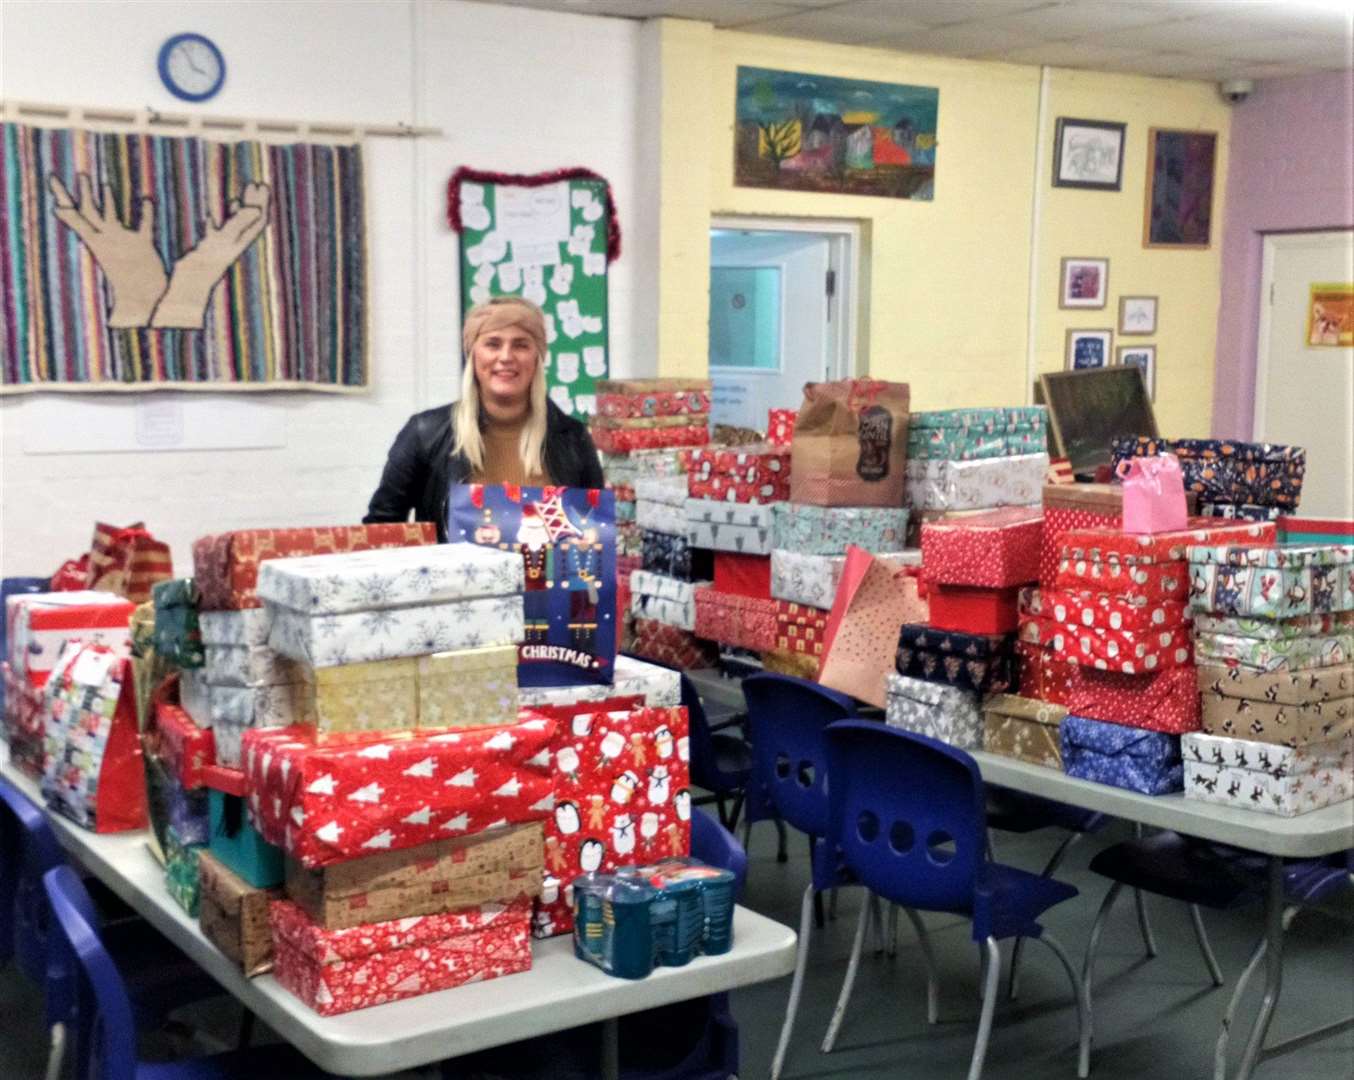 Jaymie Dunster collects the boxes in aid of the Catching Lives shelter in Canterbury